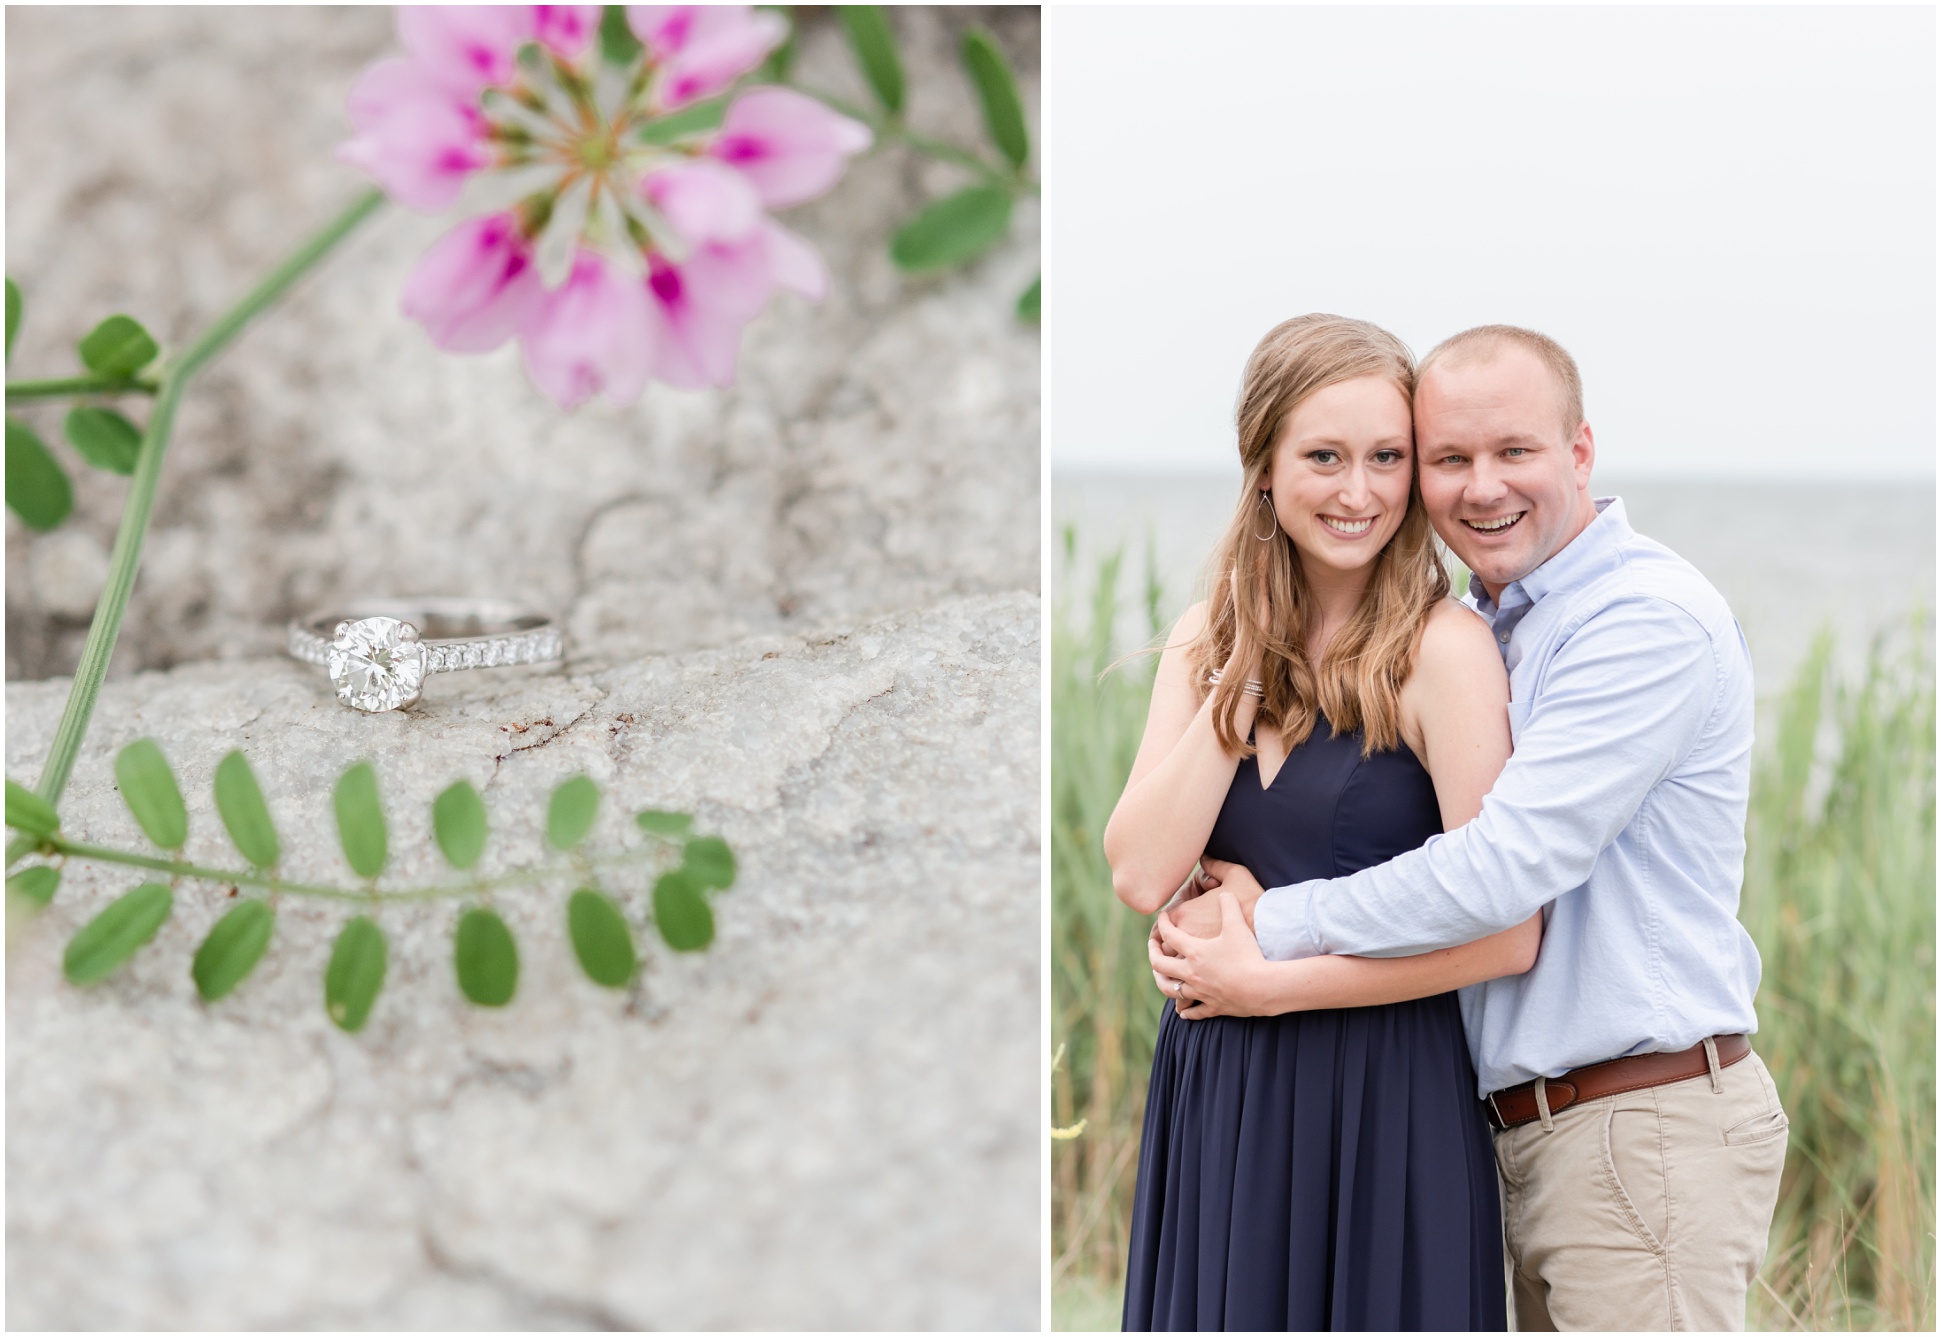 Left Image: Oval Engagement Ring with greenery, Right Image: Groom and Bride Smiling at Camera